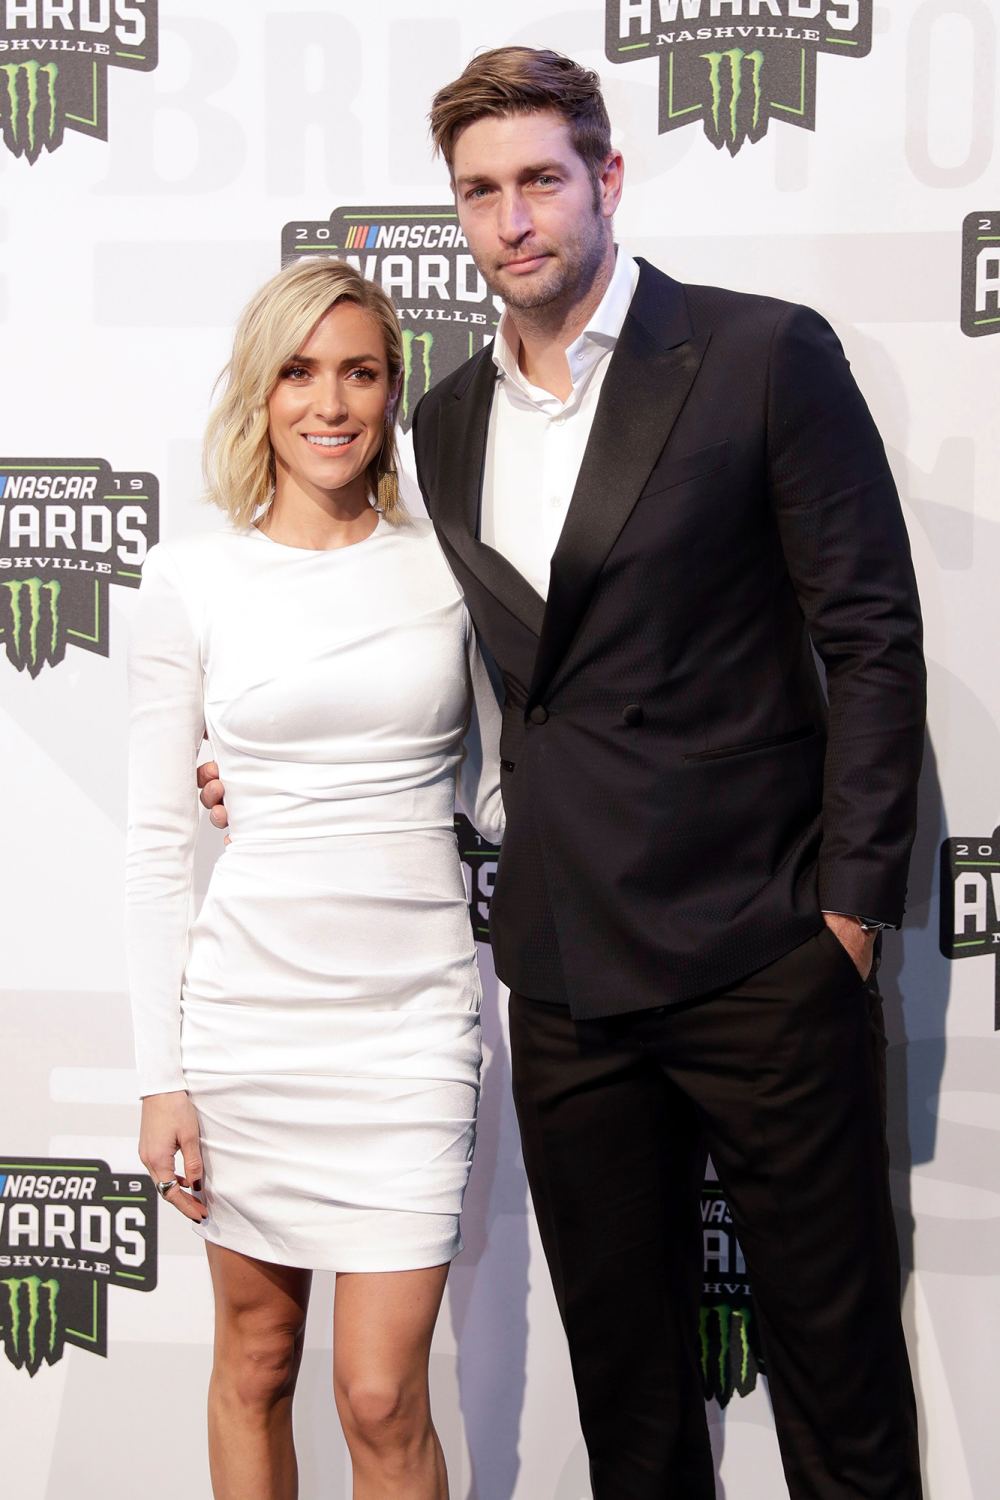 Kristin Cavallari Reveals Falling Out With Ex-BFF Kelly Henderson Involves Husband Jay Cutler